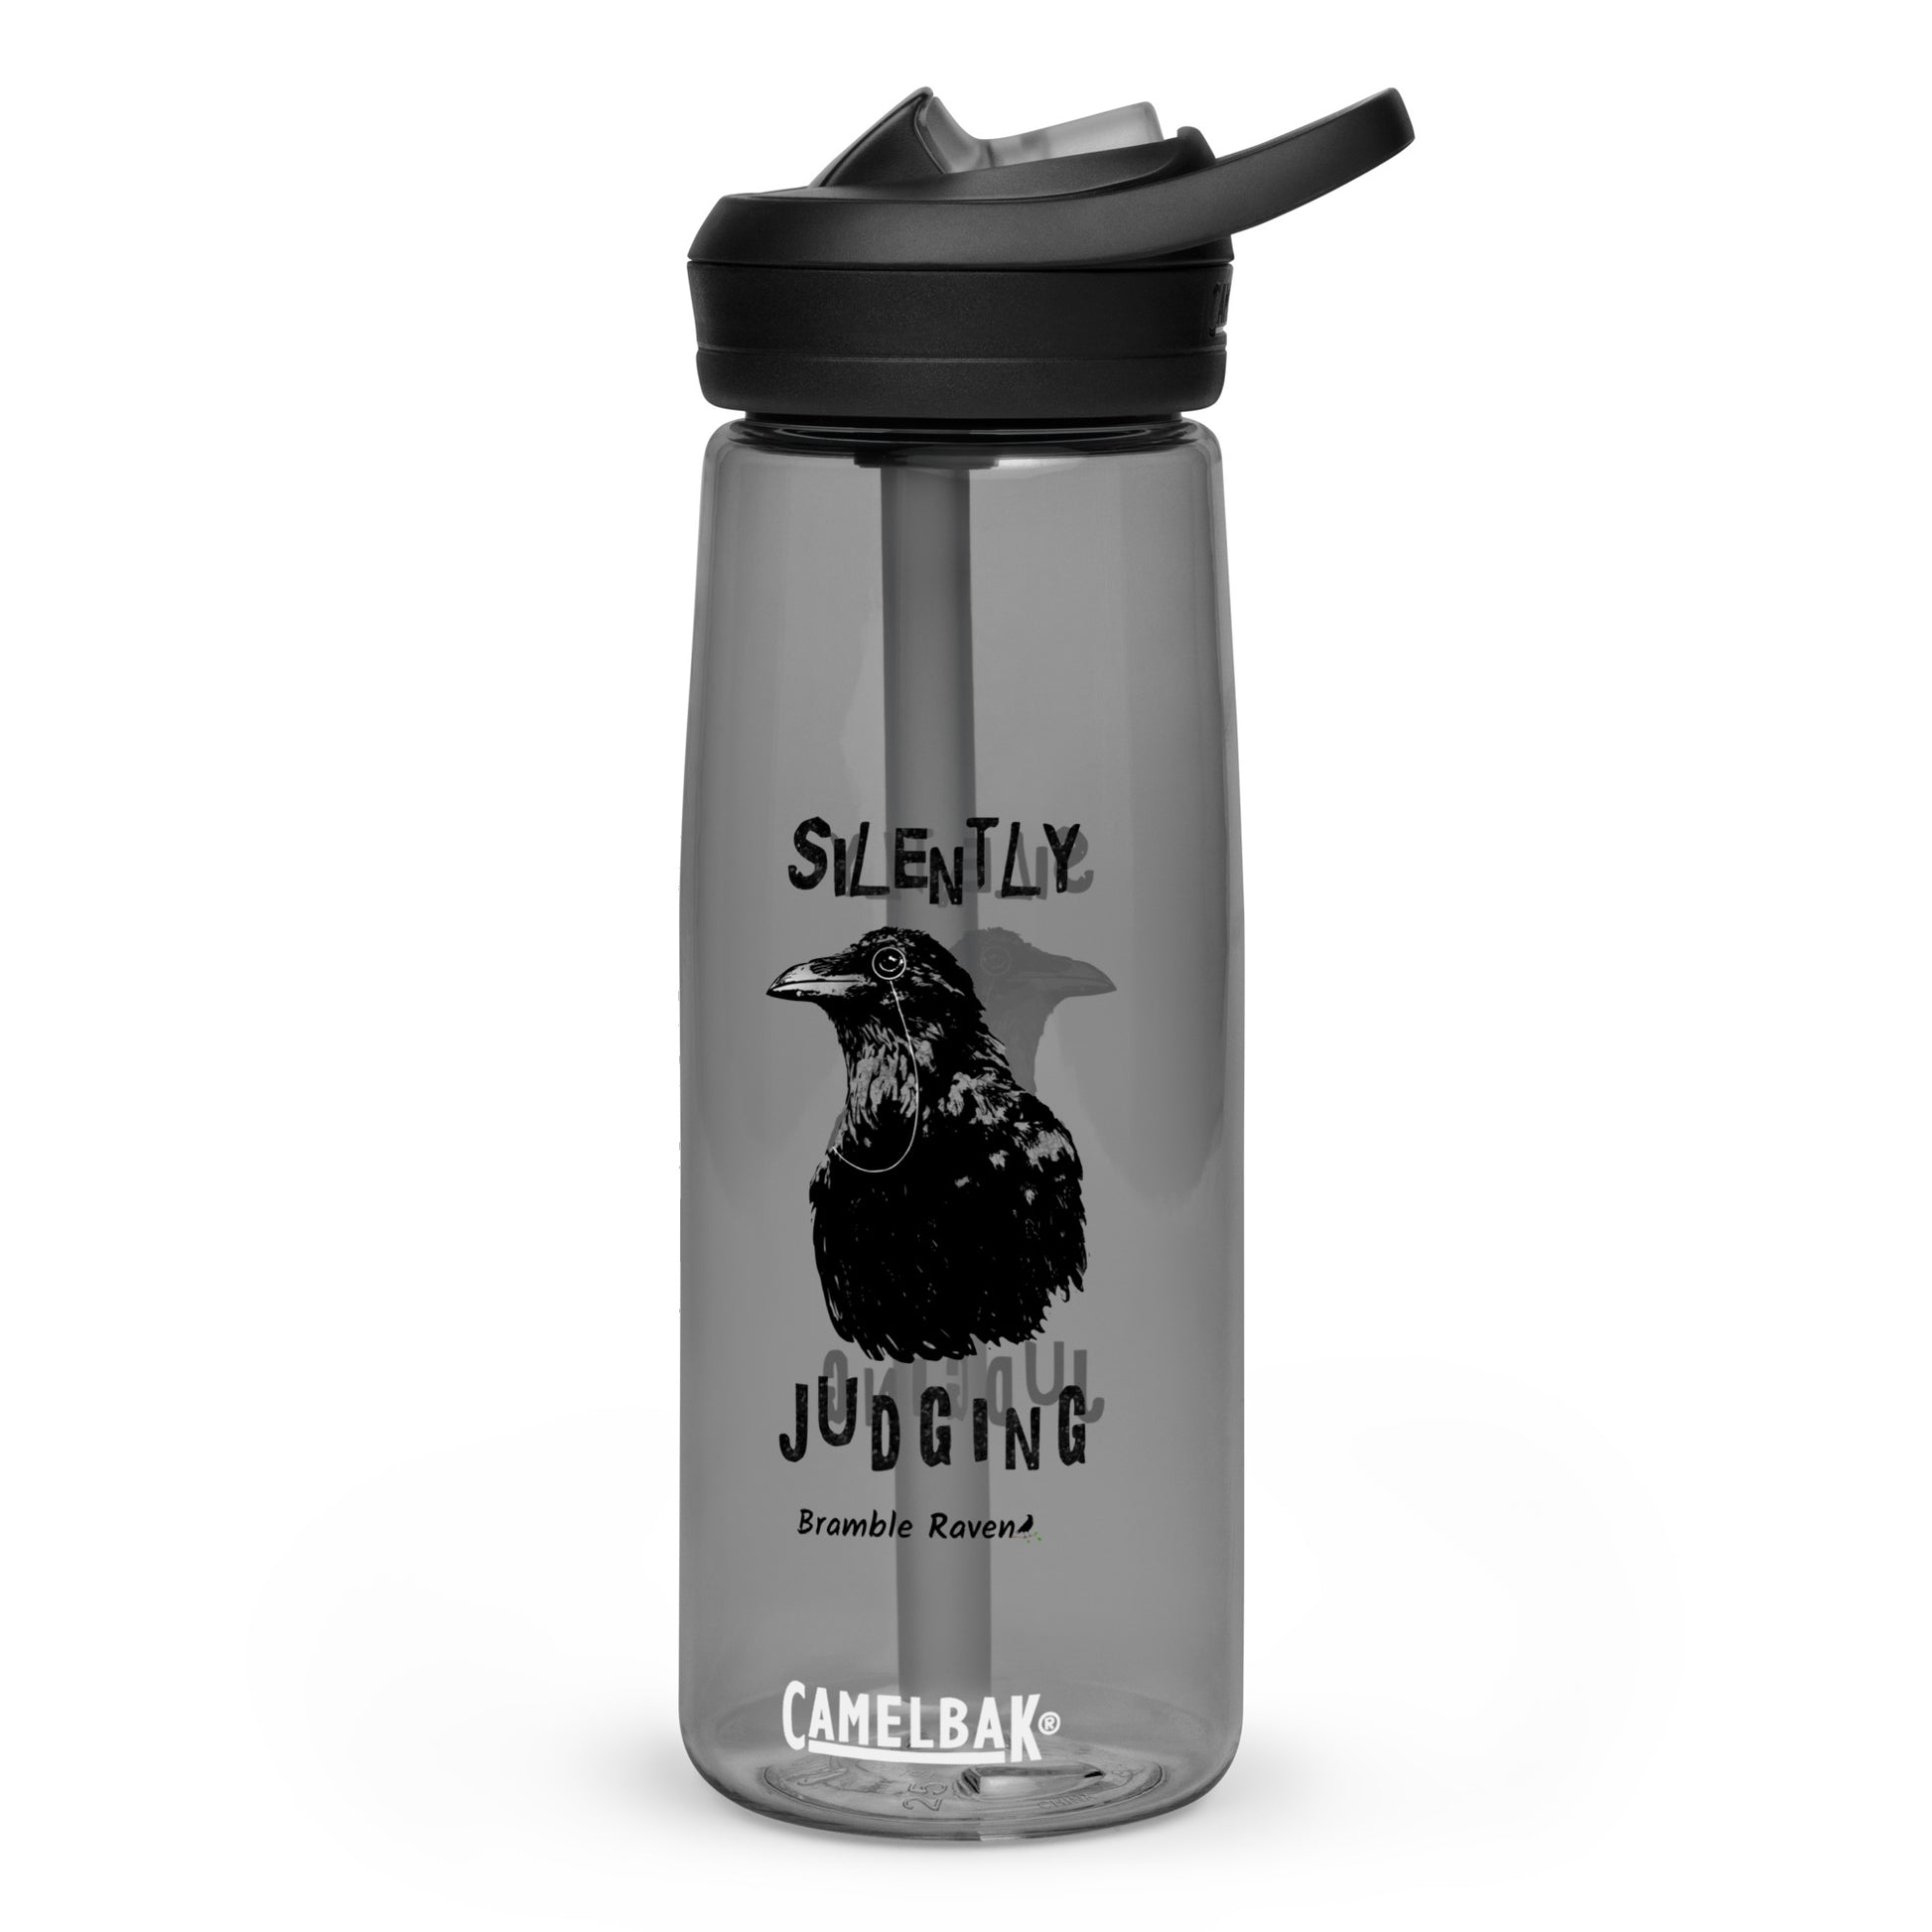 25 ounce sports water bottle with spill-proof lid and bite valve. Charcoal grey stain and odor-resistant BPA-free plastic. Features double-sided design of Silently Judging Crow with his monocle.